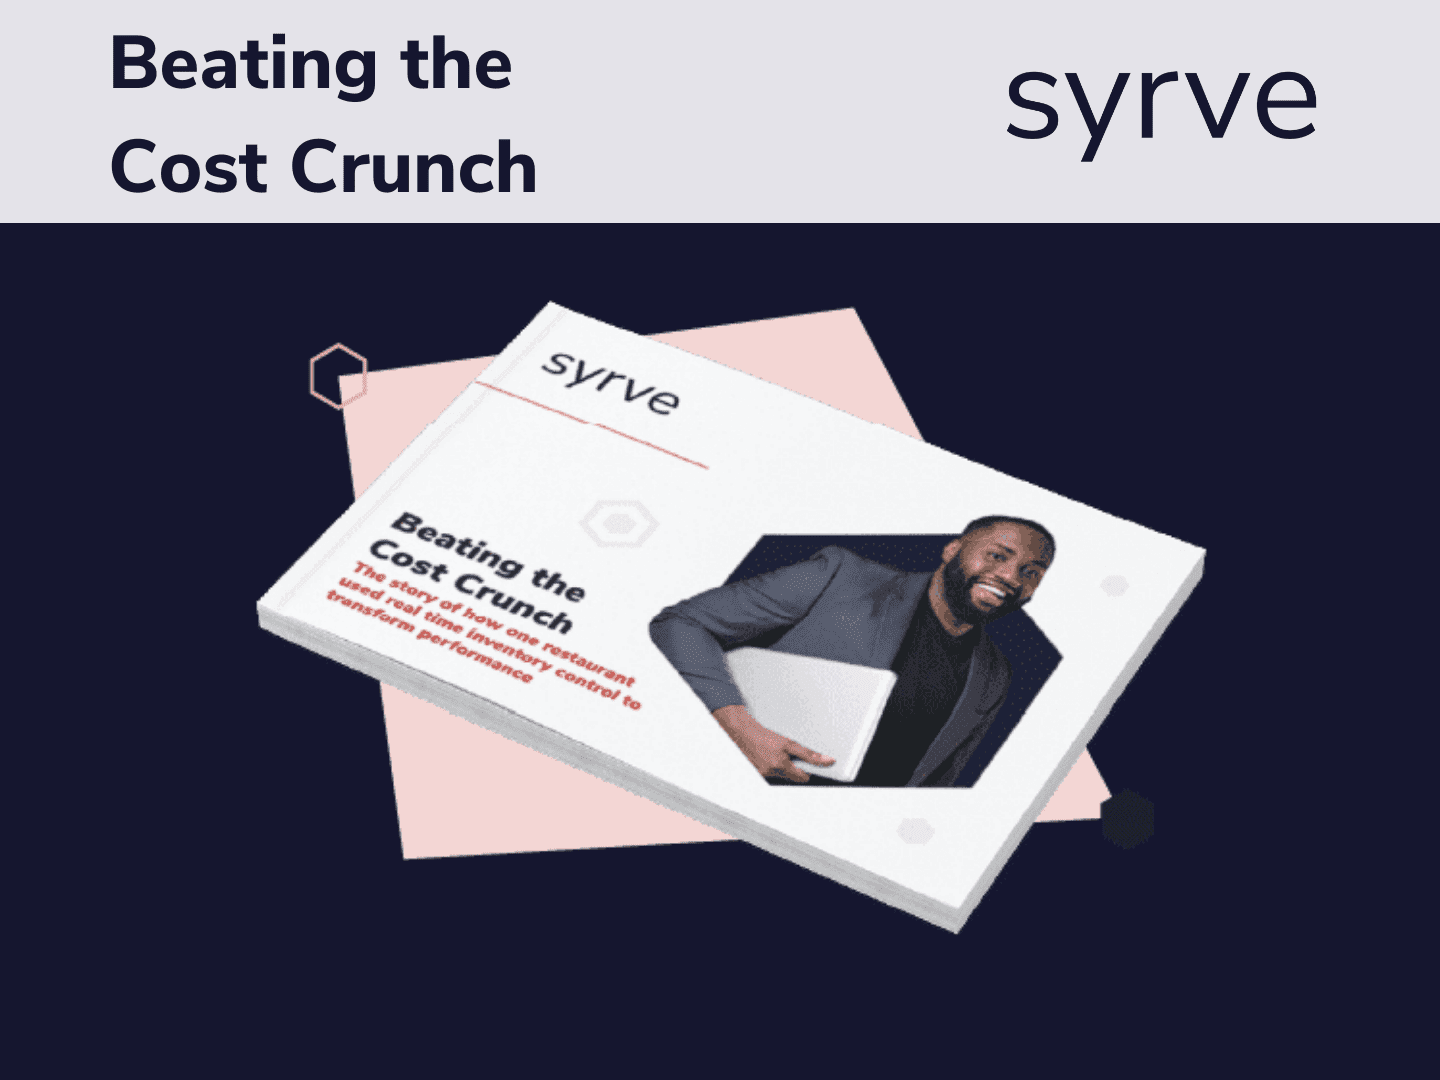 Beating the Cost Crunch